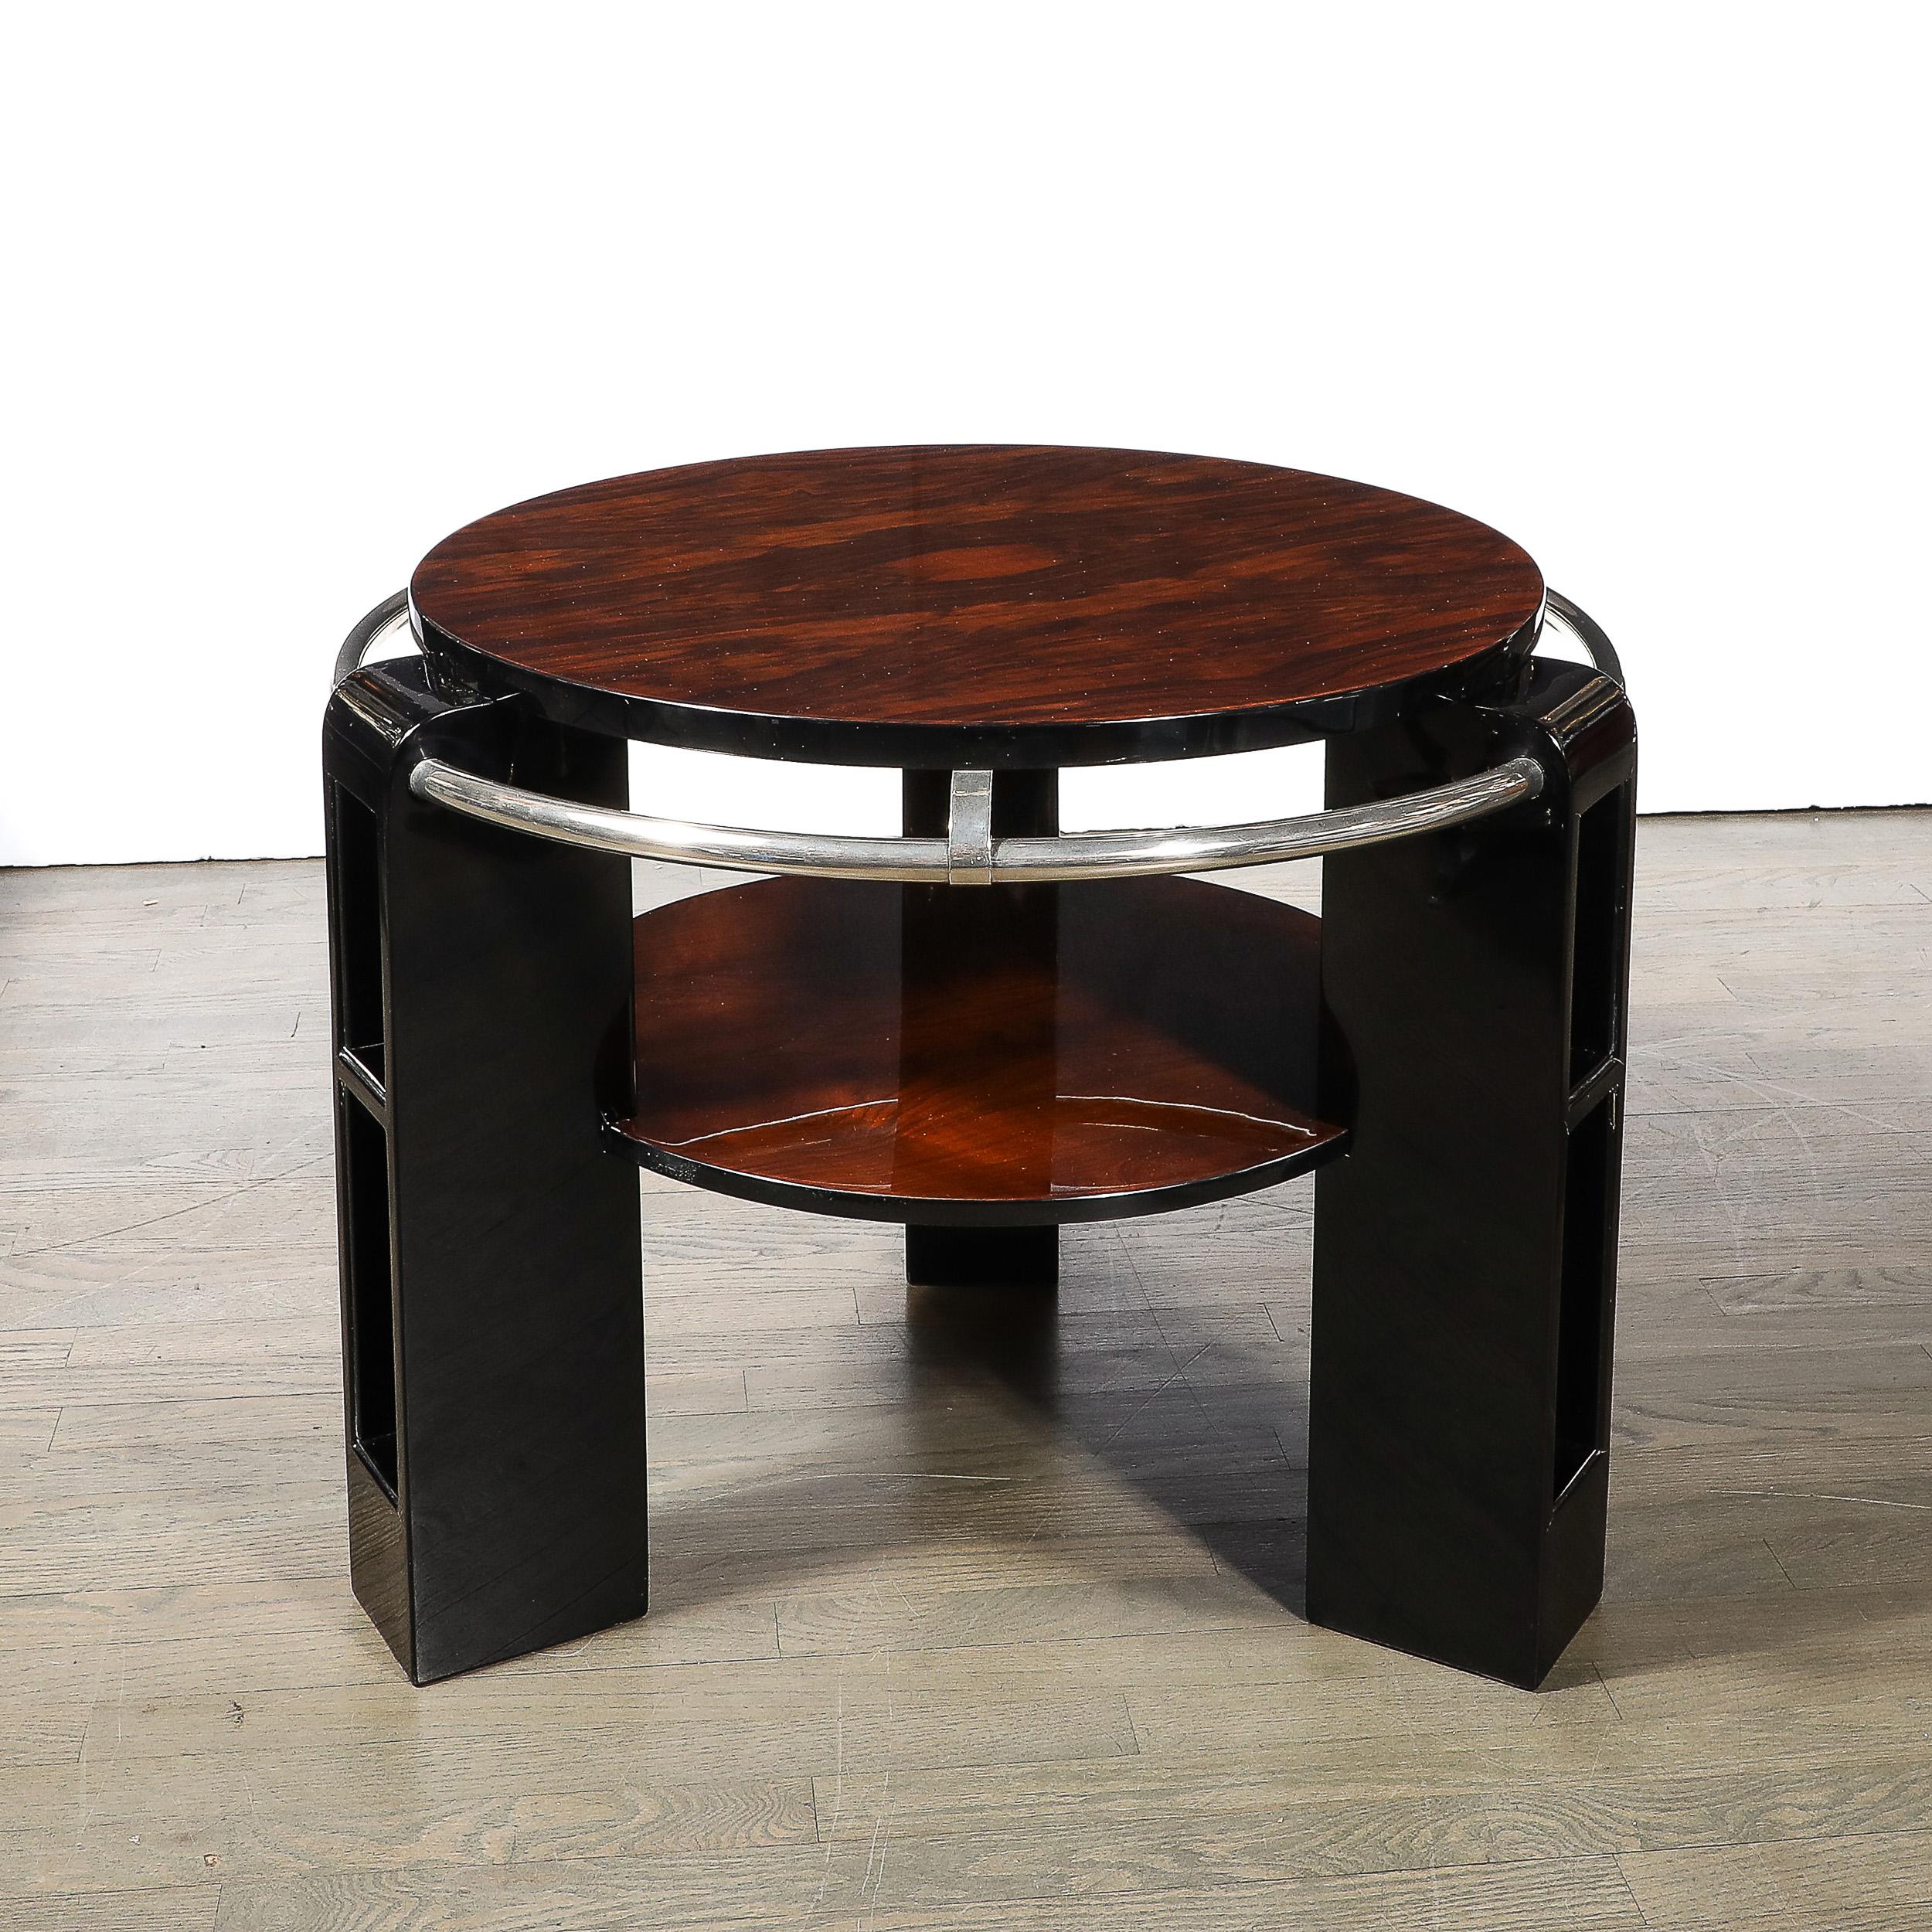 Art Deco Two-Tier Book-Matched Walnut & Black Lacquer Occasional Table w/ Chrome For Sale 9